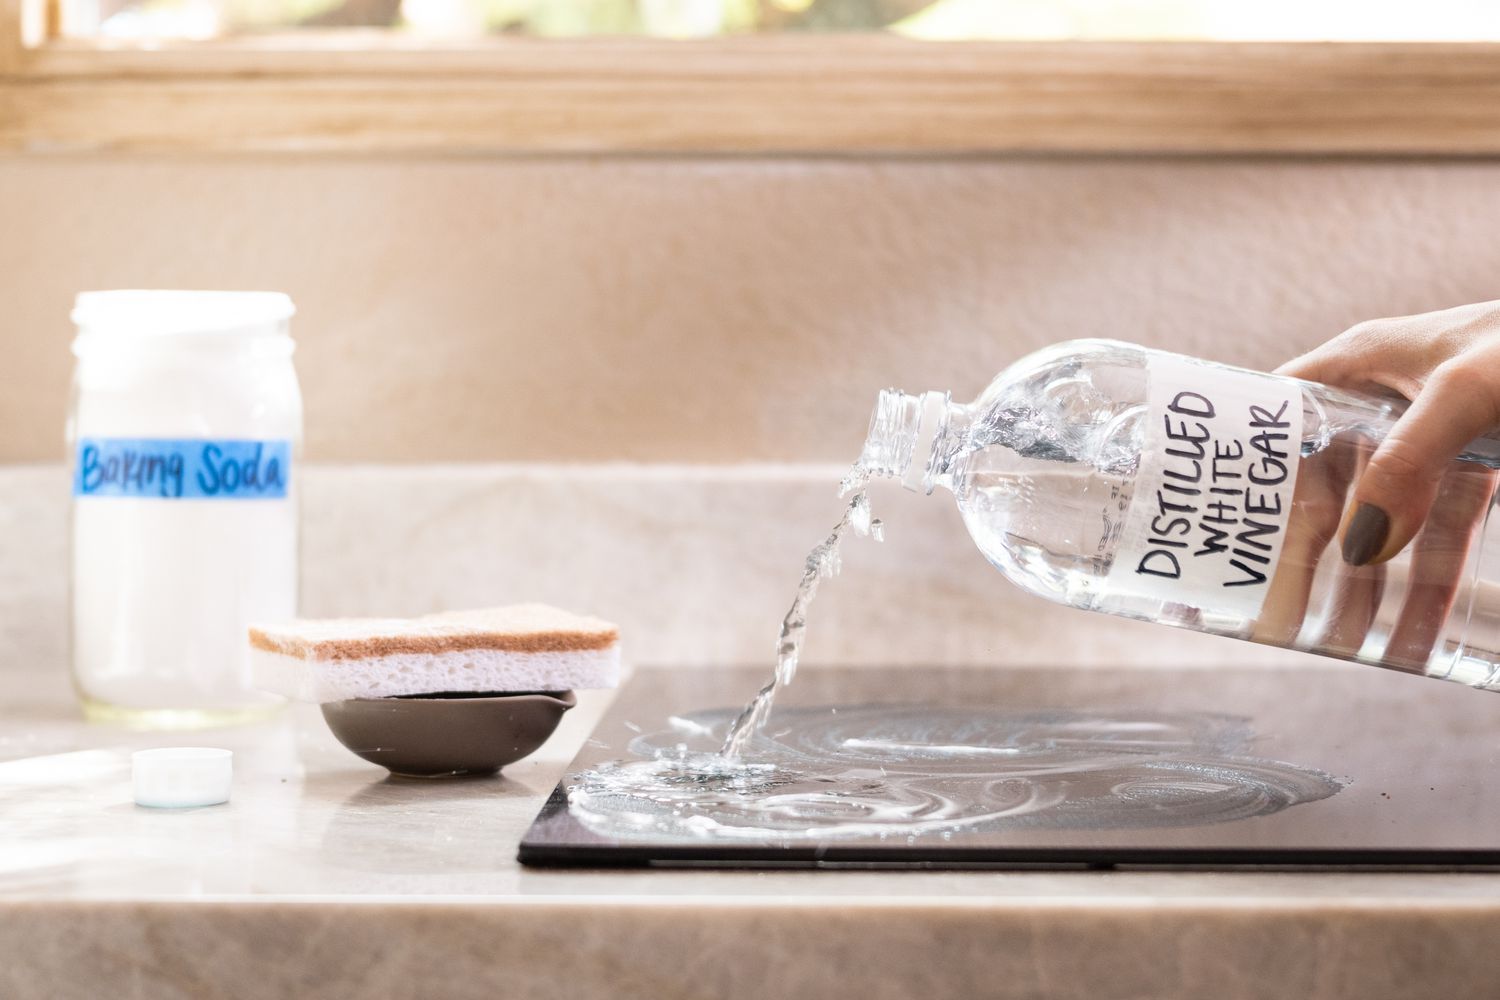 Why You Should Never Use Baking Soda And Vinegar To Unclog A Drain